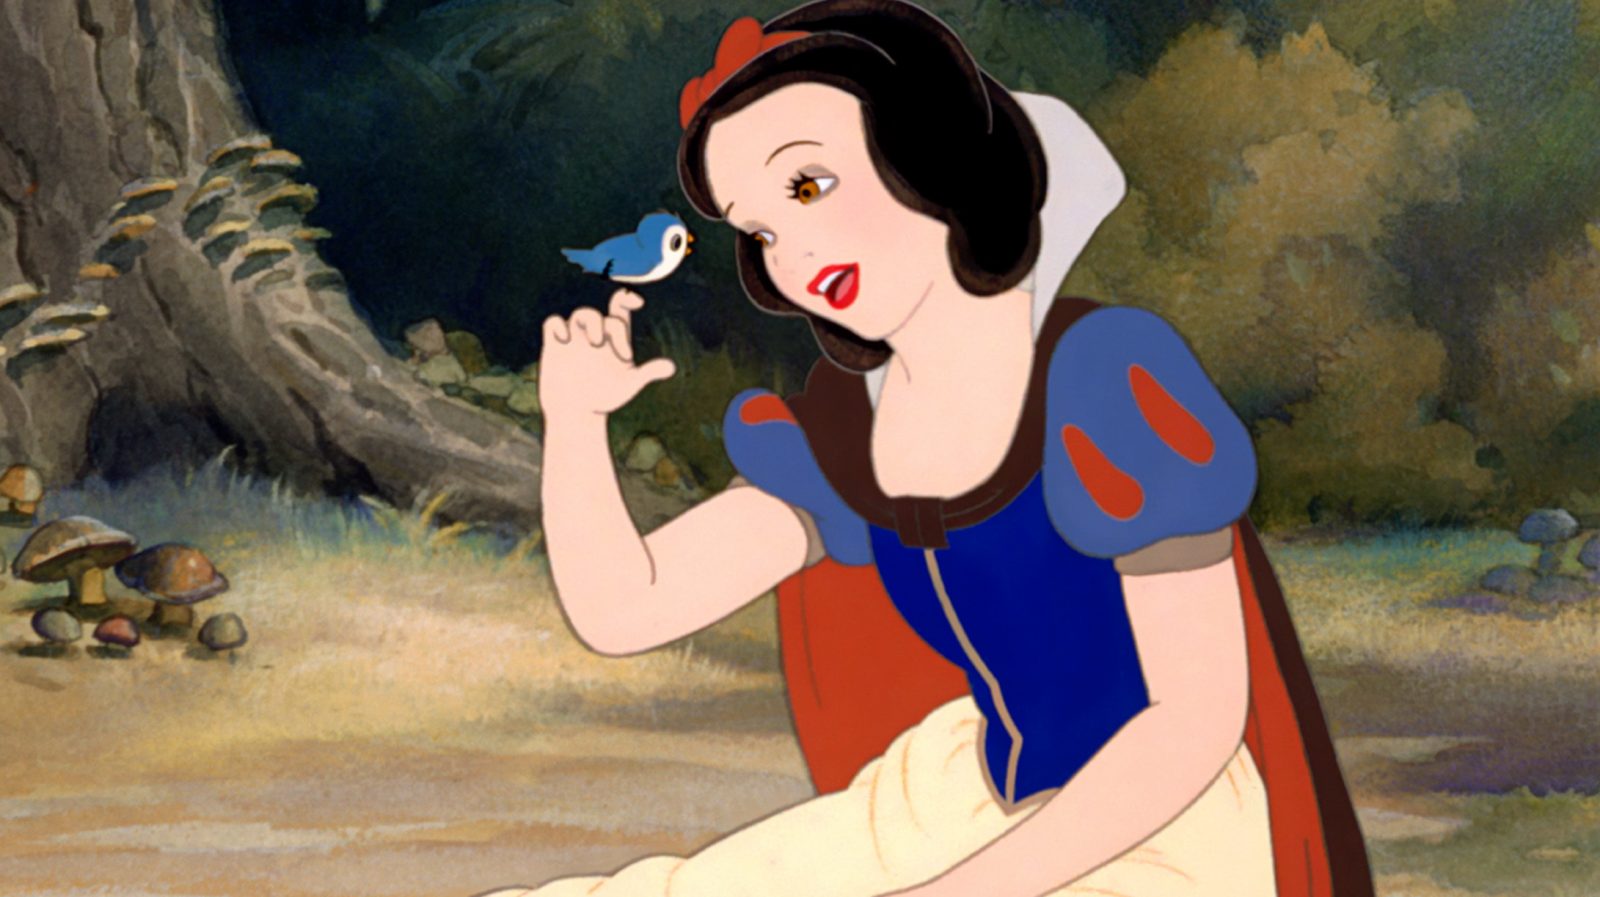 I Bet You Can’t Get 13/18 on This General Knowledge Quiz (feat. Disney) Snow White